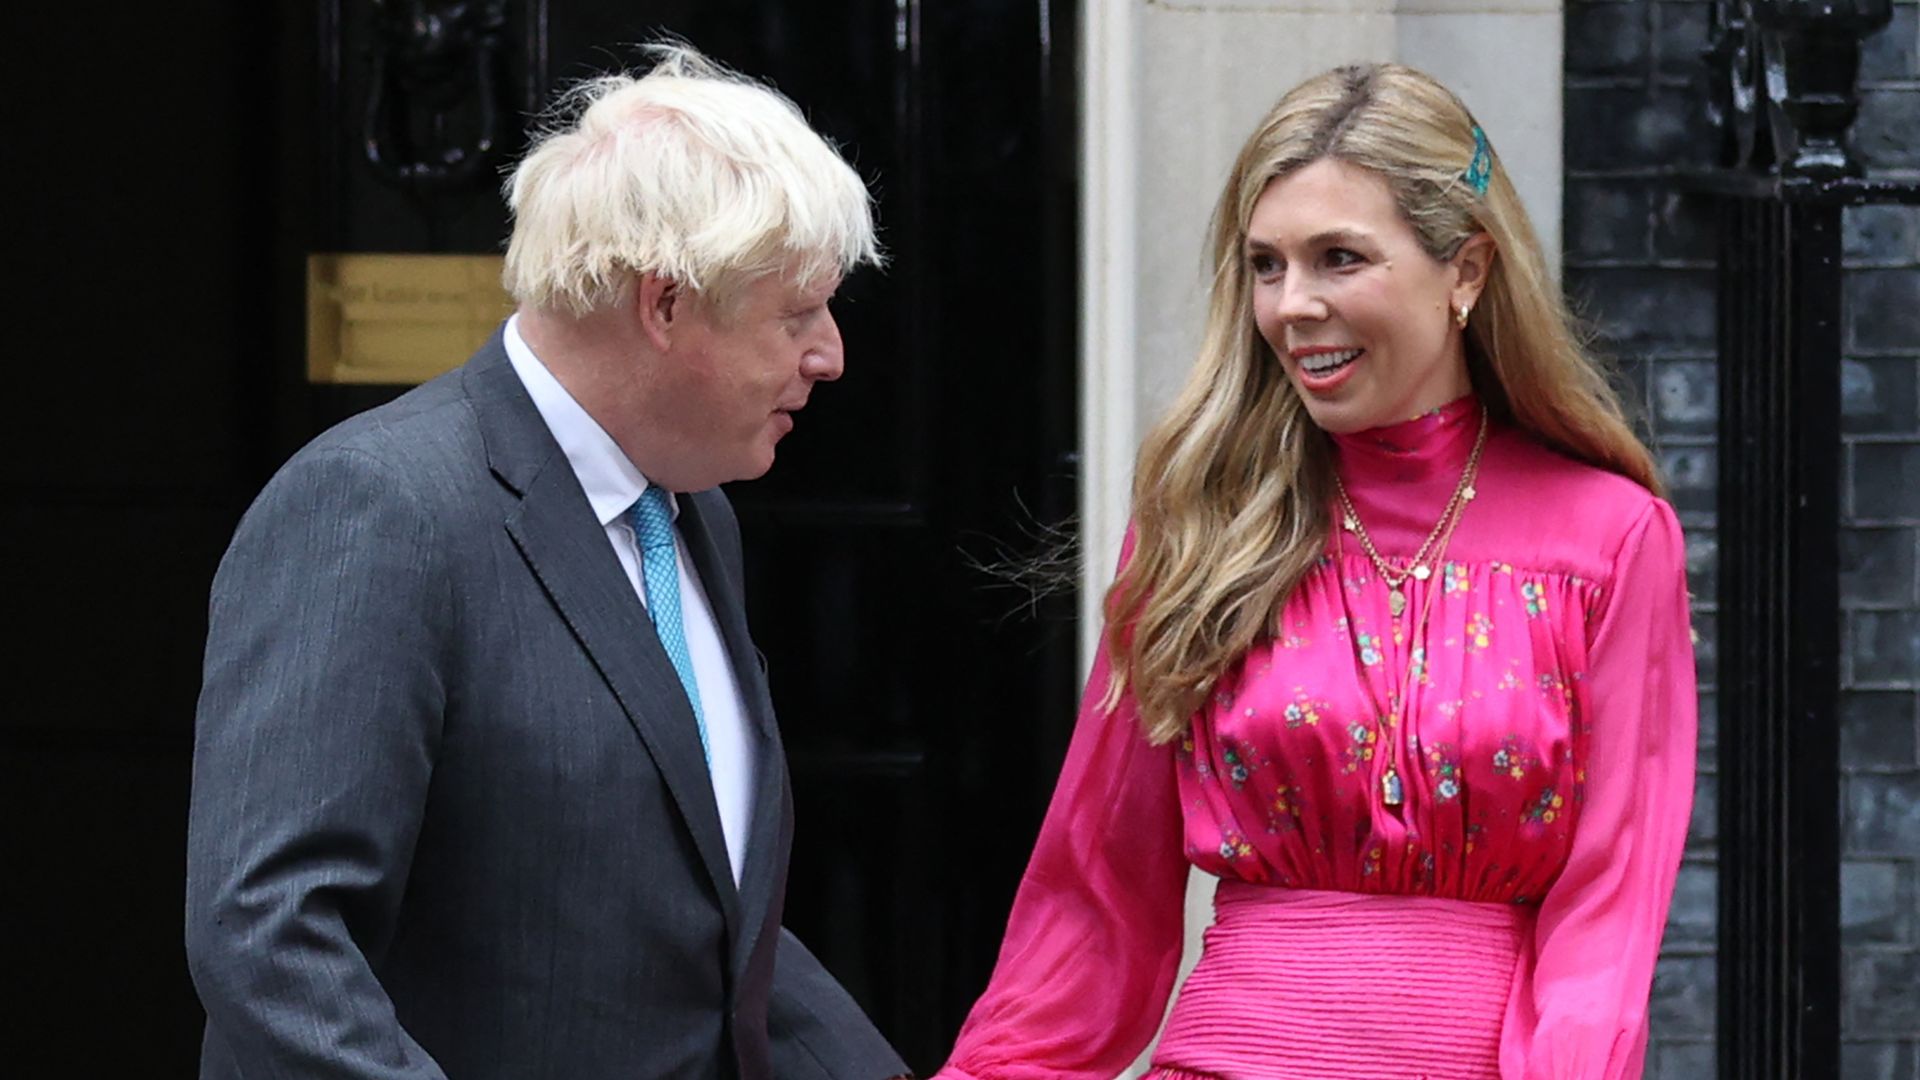 Britain's outgoing Prime Minister Boris Johnson (L) and his wife Carrie come out of Number 10 as Johnson prepares to deliver his final speech outside 10 Downing Street in central London on September 6, 2022, 